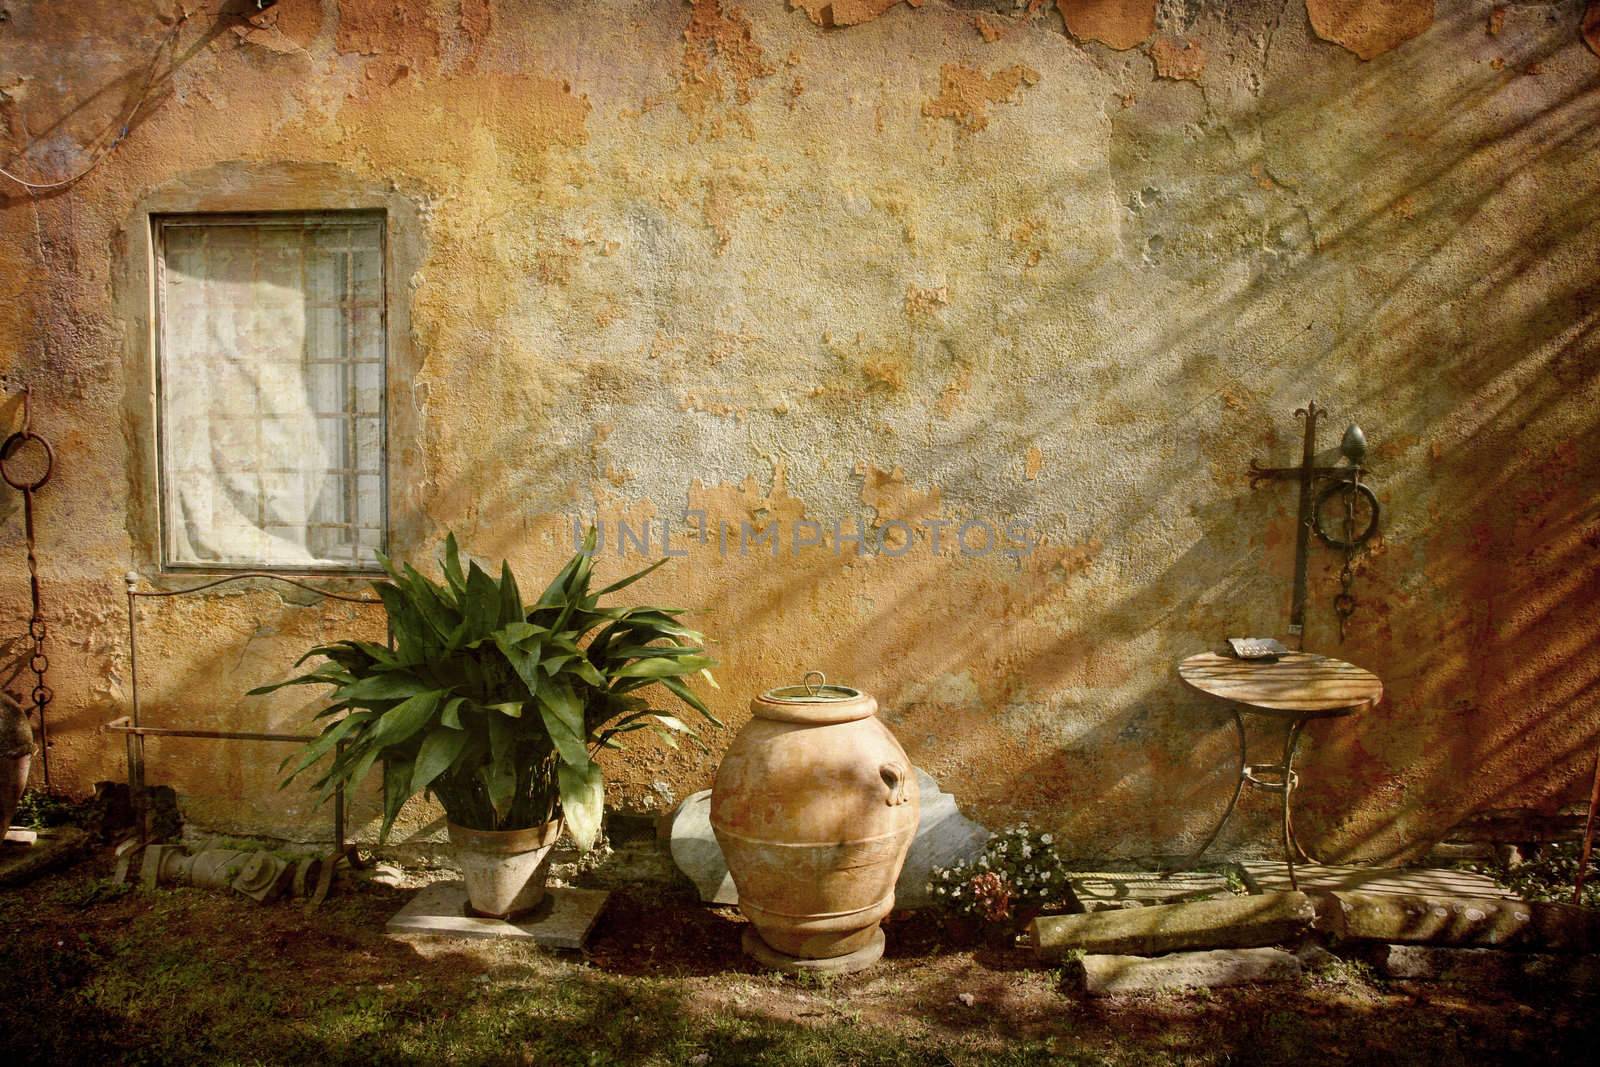 Artistic work of my own in retro style - Postcard from Italy. - Country garden - Tuscany.